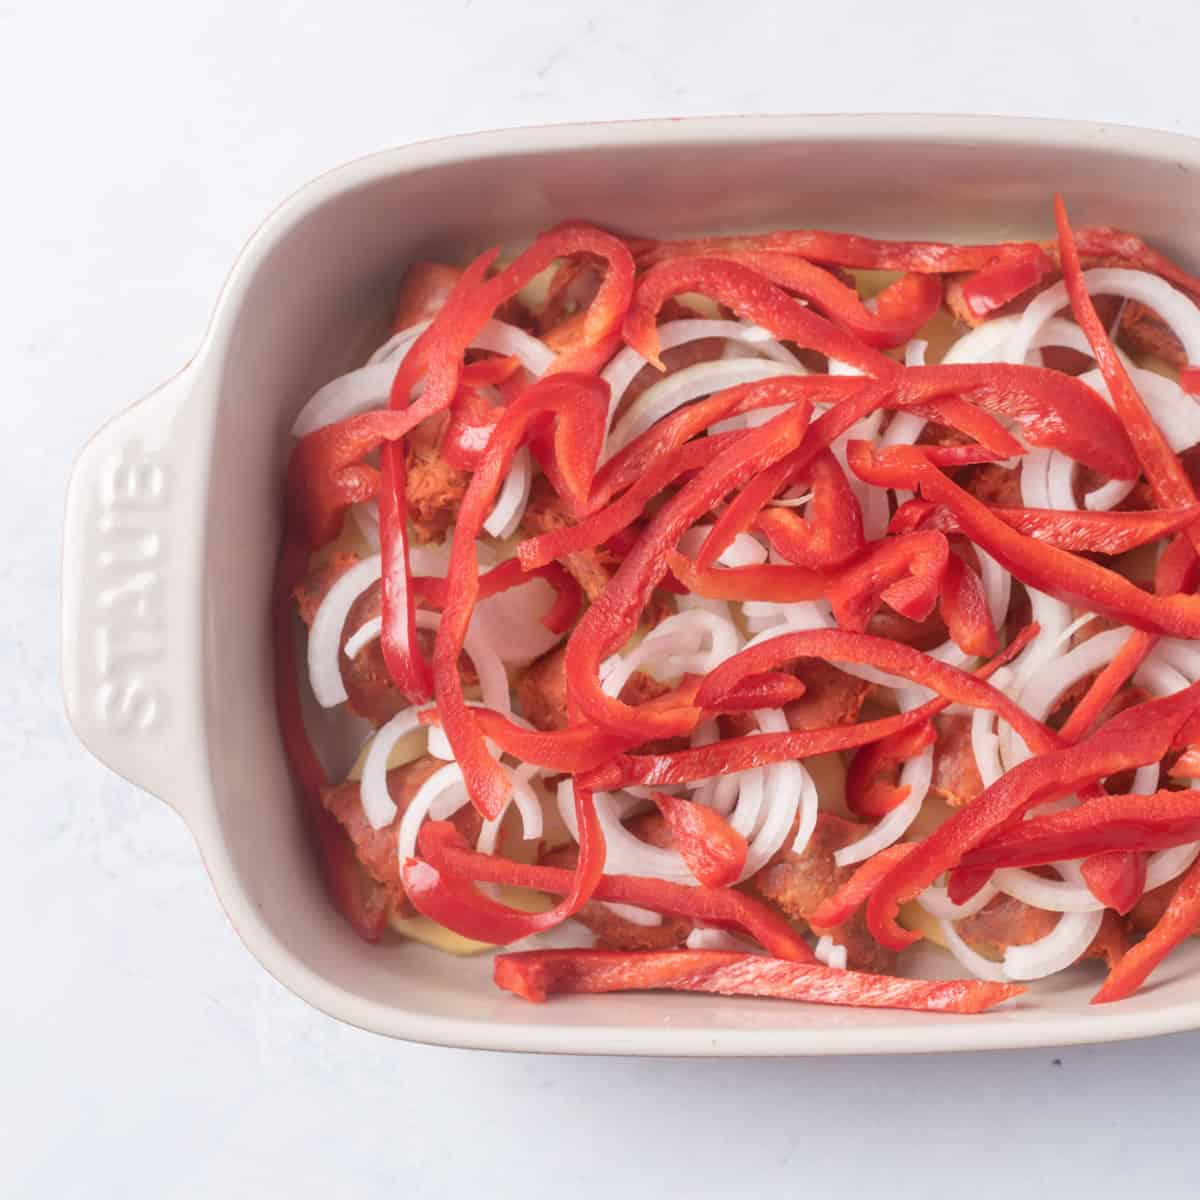 layers of potatoes, sausage, onions and red peppers in small baking dish